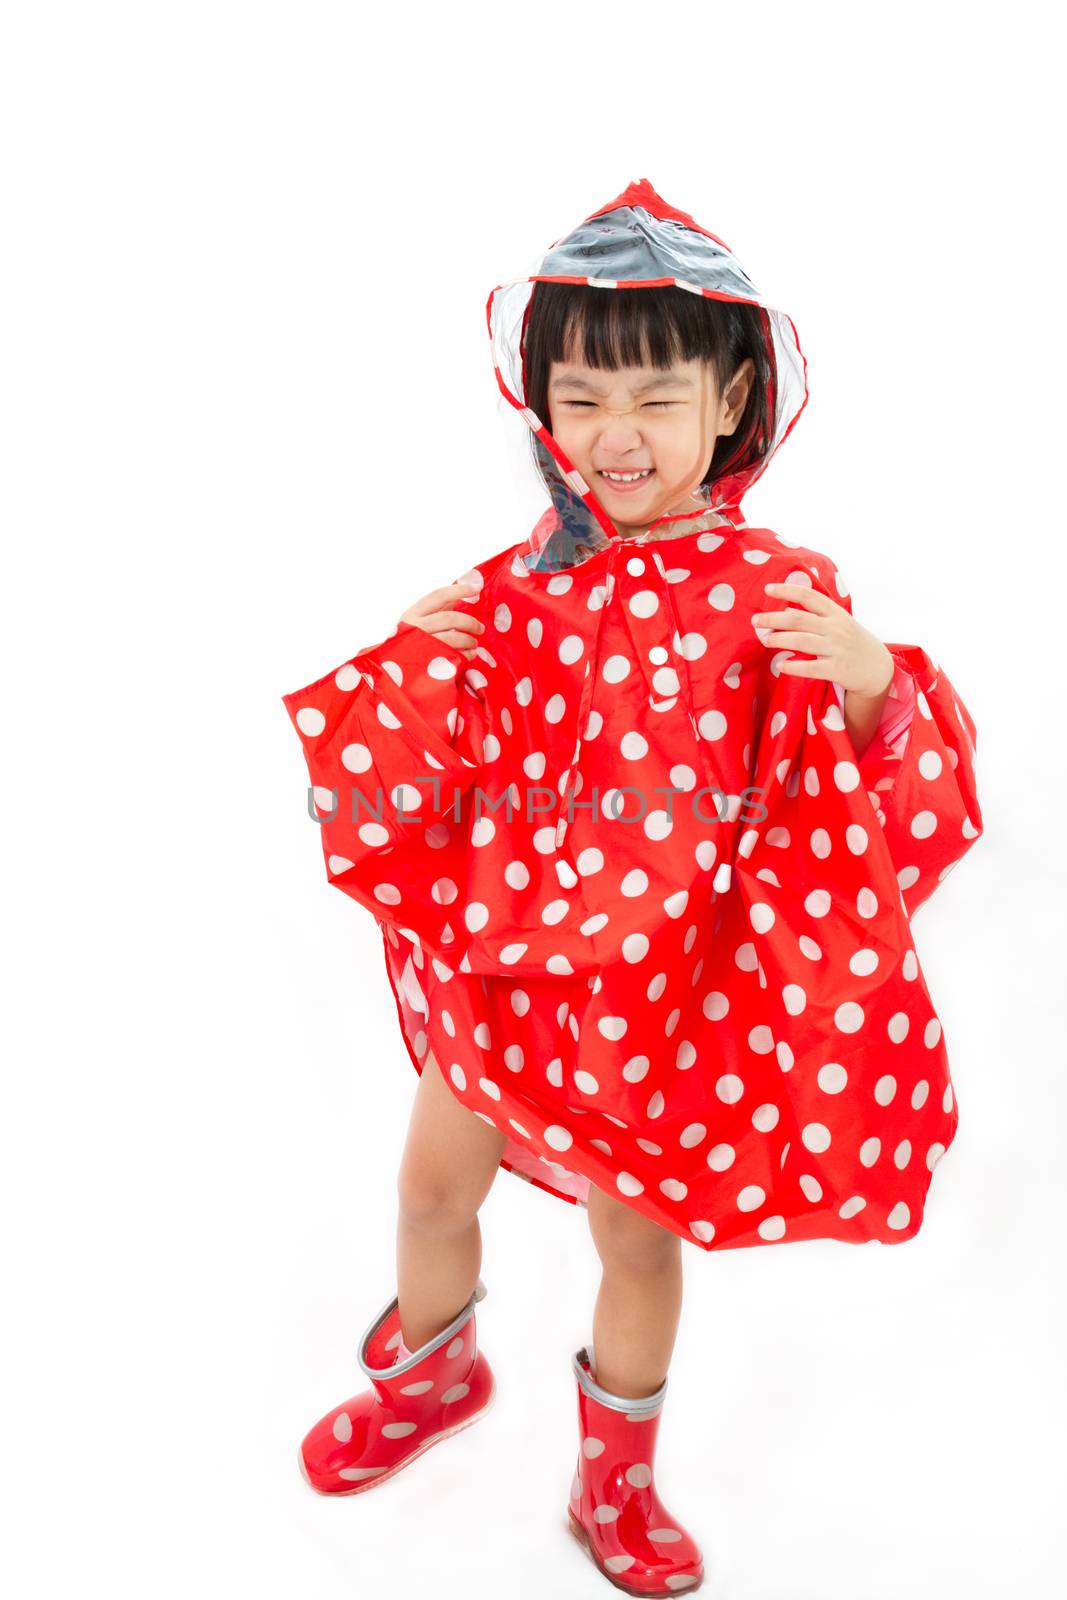 Chinese Little Girl Wearing raincoat and Boots by kiankhoon